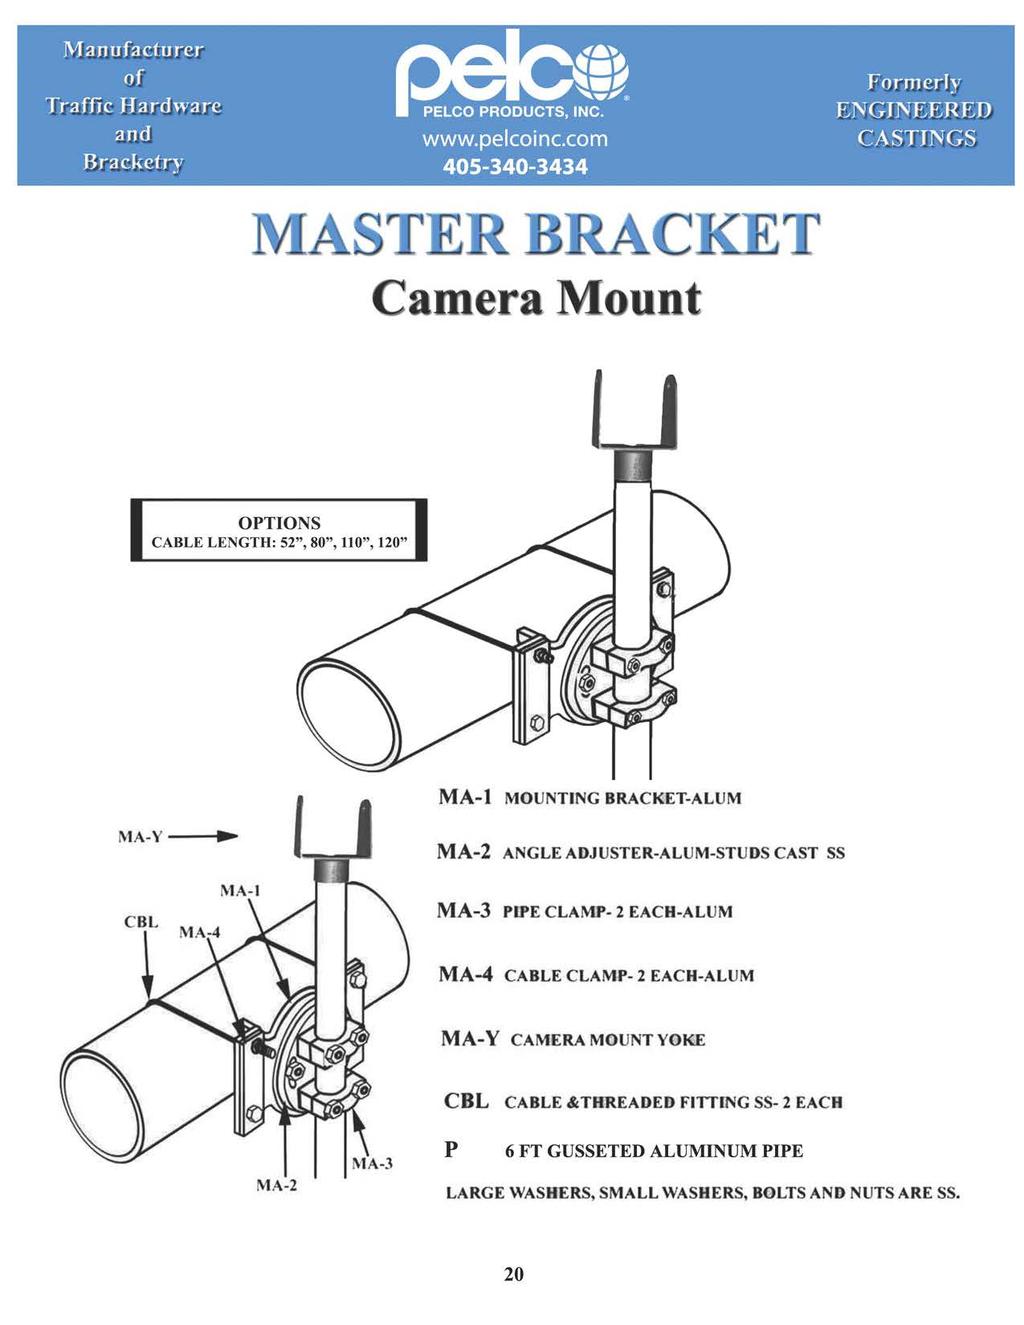 Camera Mount OPTIONS CABLE LENGTH: 52", 8", 11", 12" MA-l MOUNTING BRACKET-ALUM MA-Y.